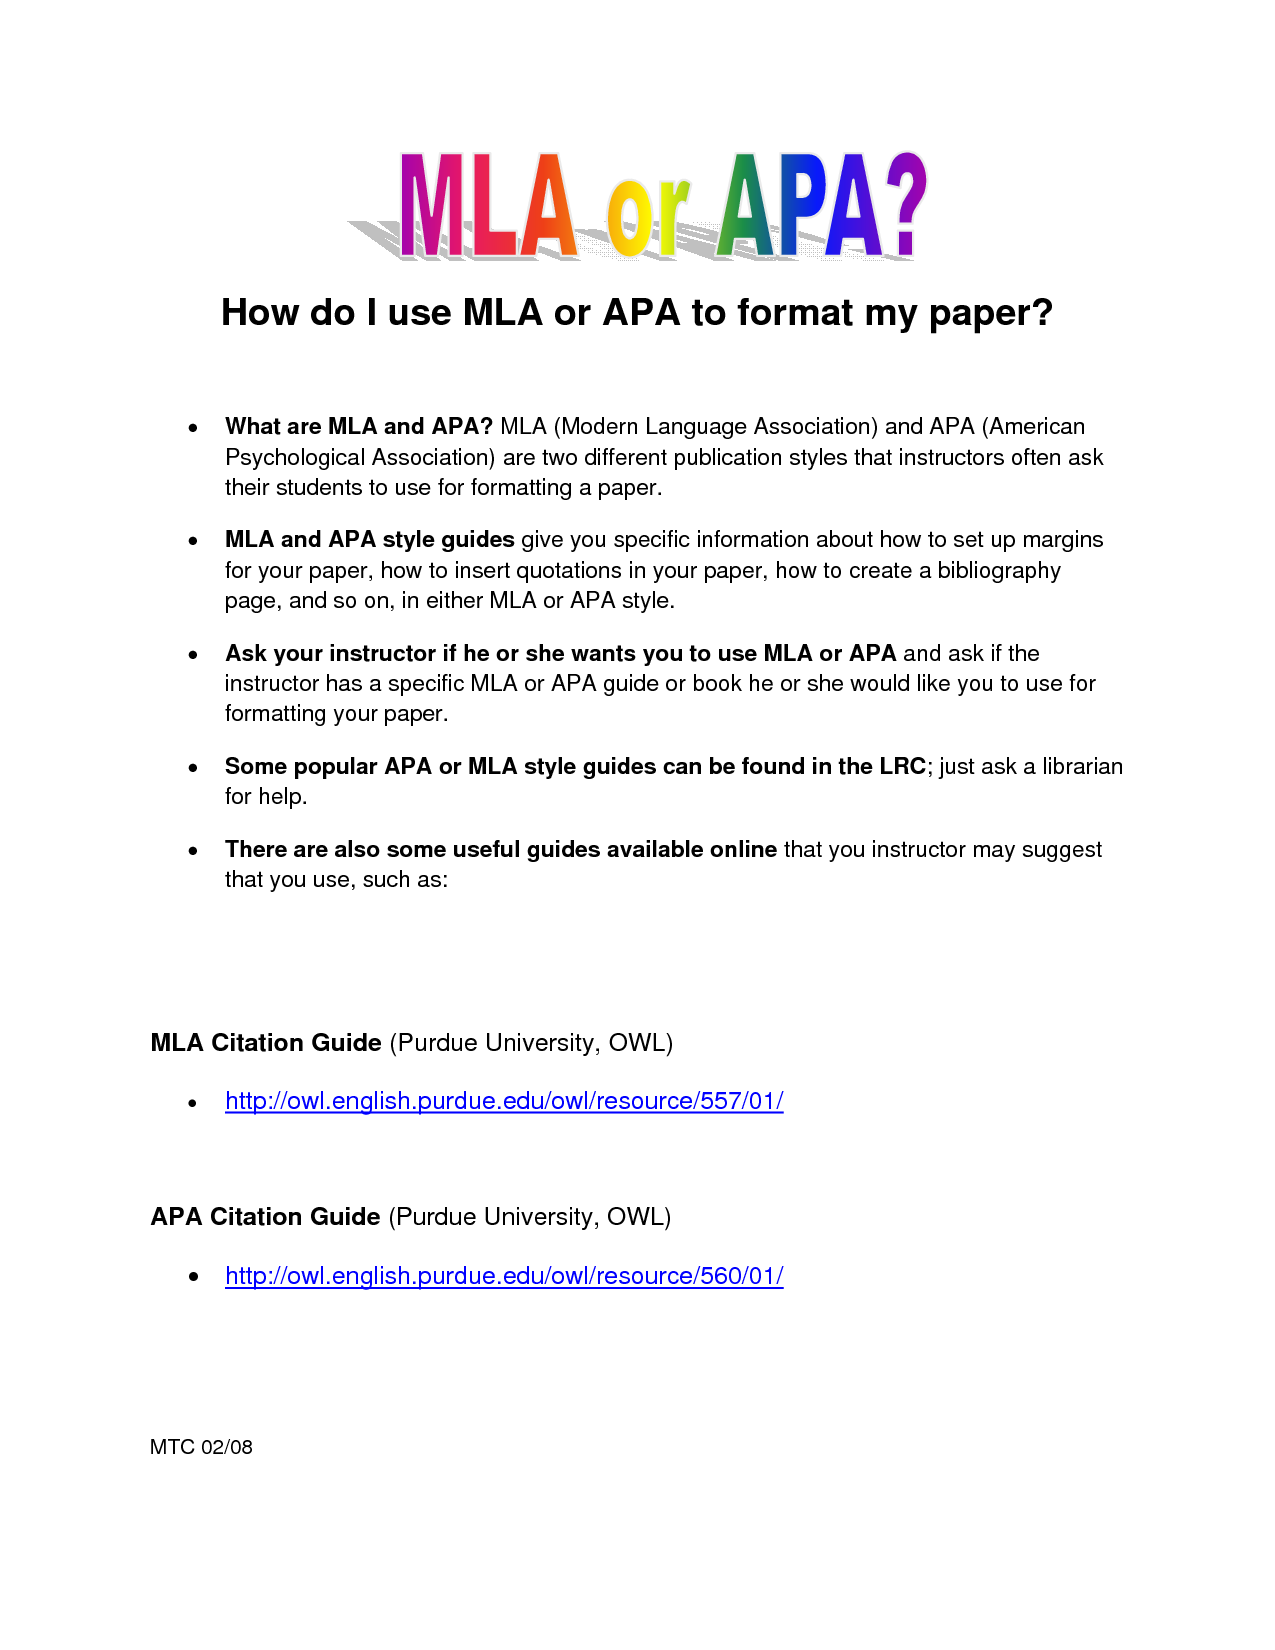 Papers Mla Or Apa Cover Letter For Job Application As Teacher